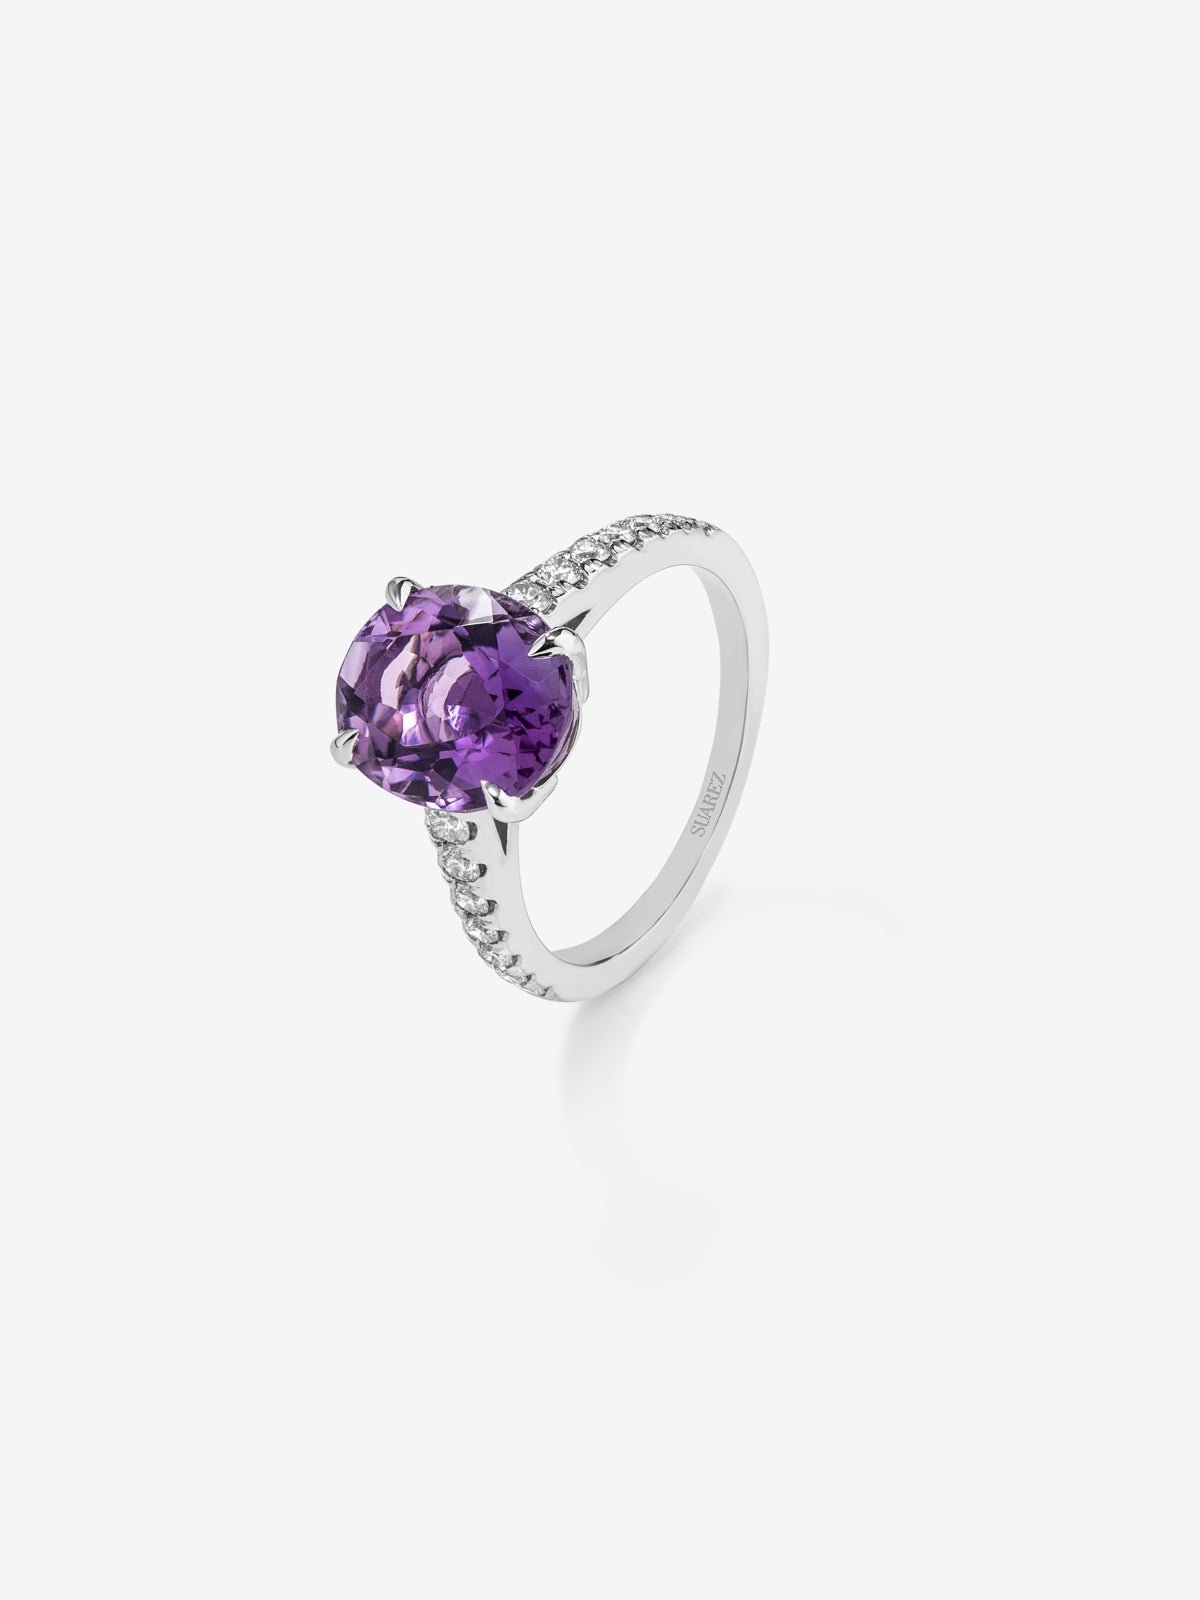 18K white gold ring with oval-cut purple amethyst of 3.51 cts and 14 brilliant-cut diamonds with a total of 0.32 cts